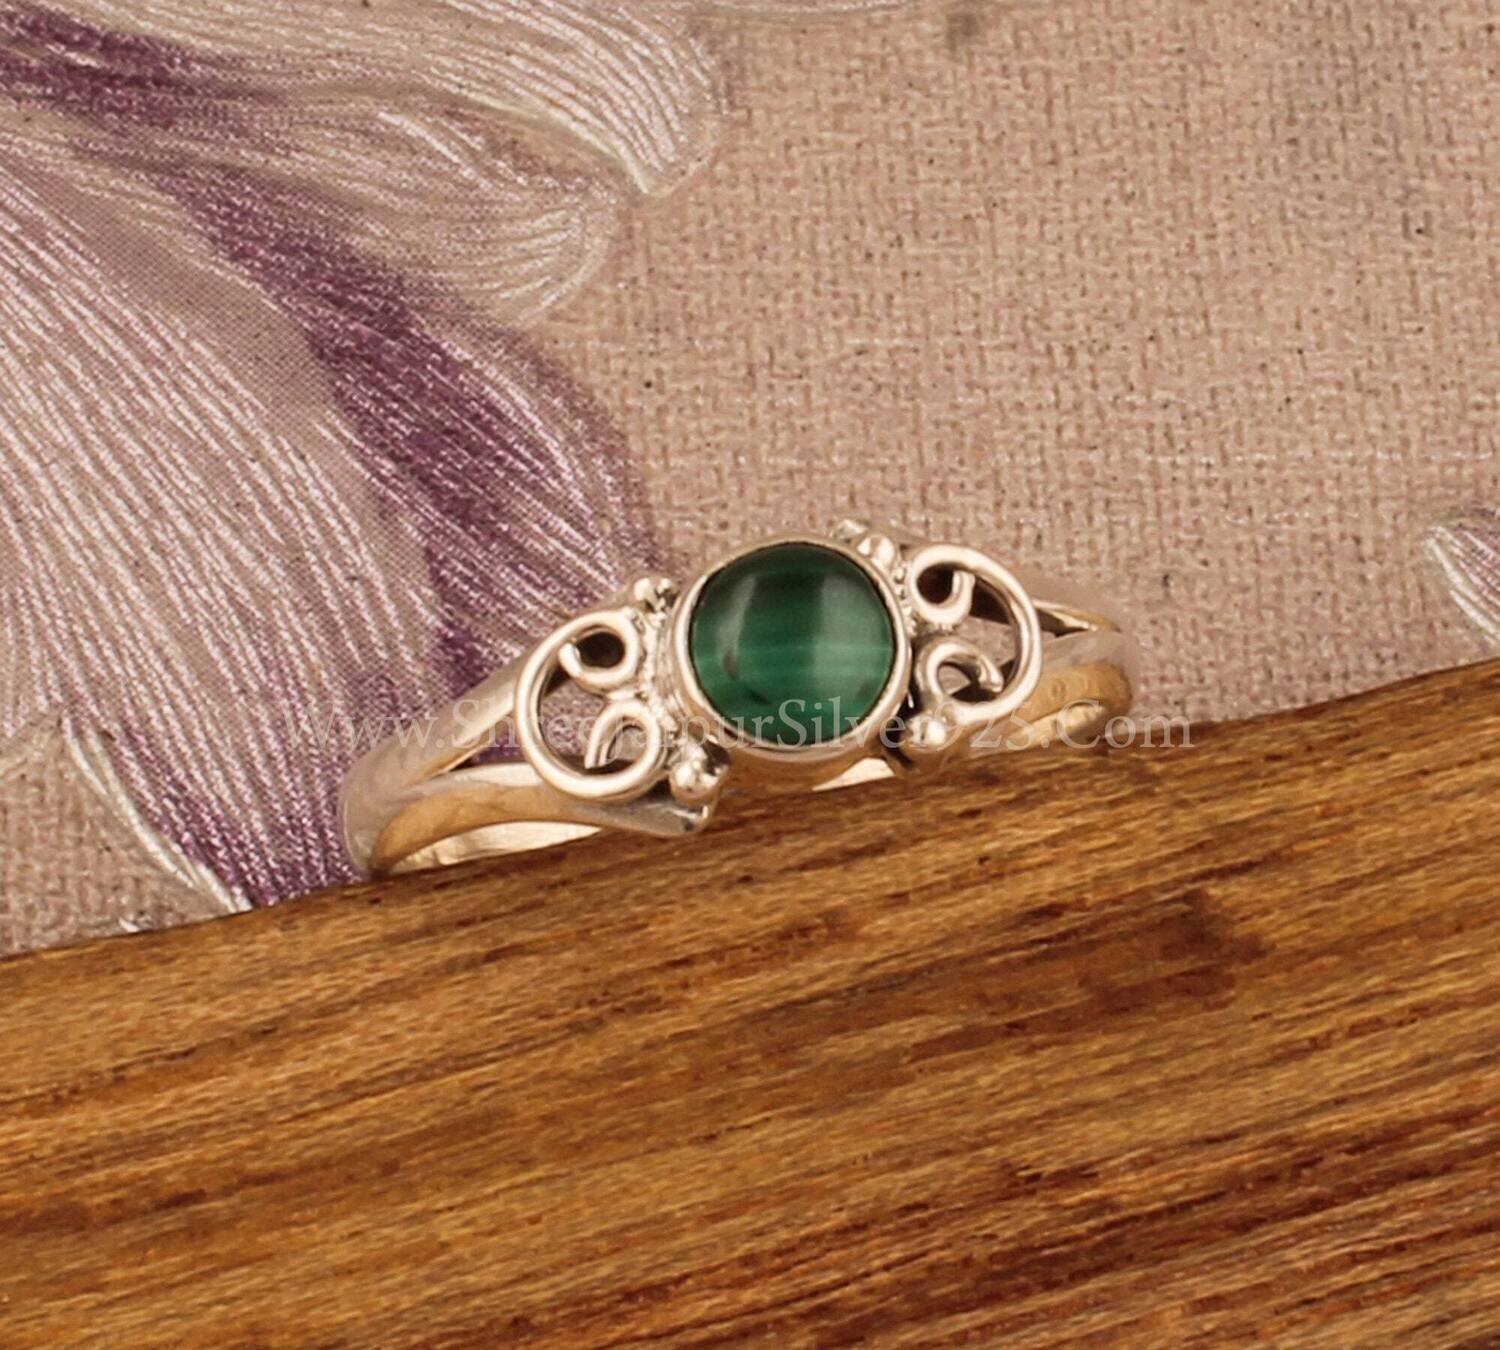 Round Malachite Solid 925 Sterling Silver Ring For Women, Handmade Round Stone Dainty Vintage Design Ring For Wedding Anniversary Gift Idea